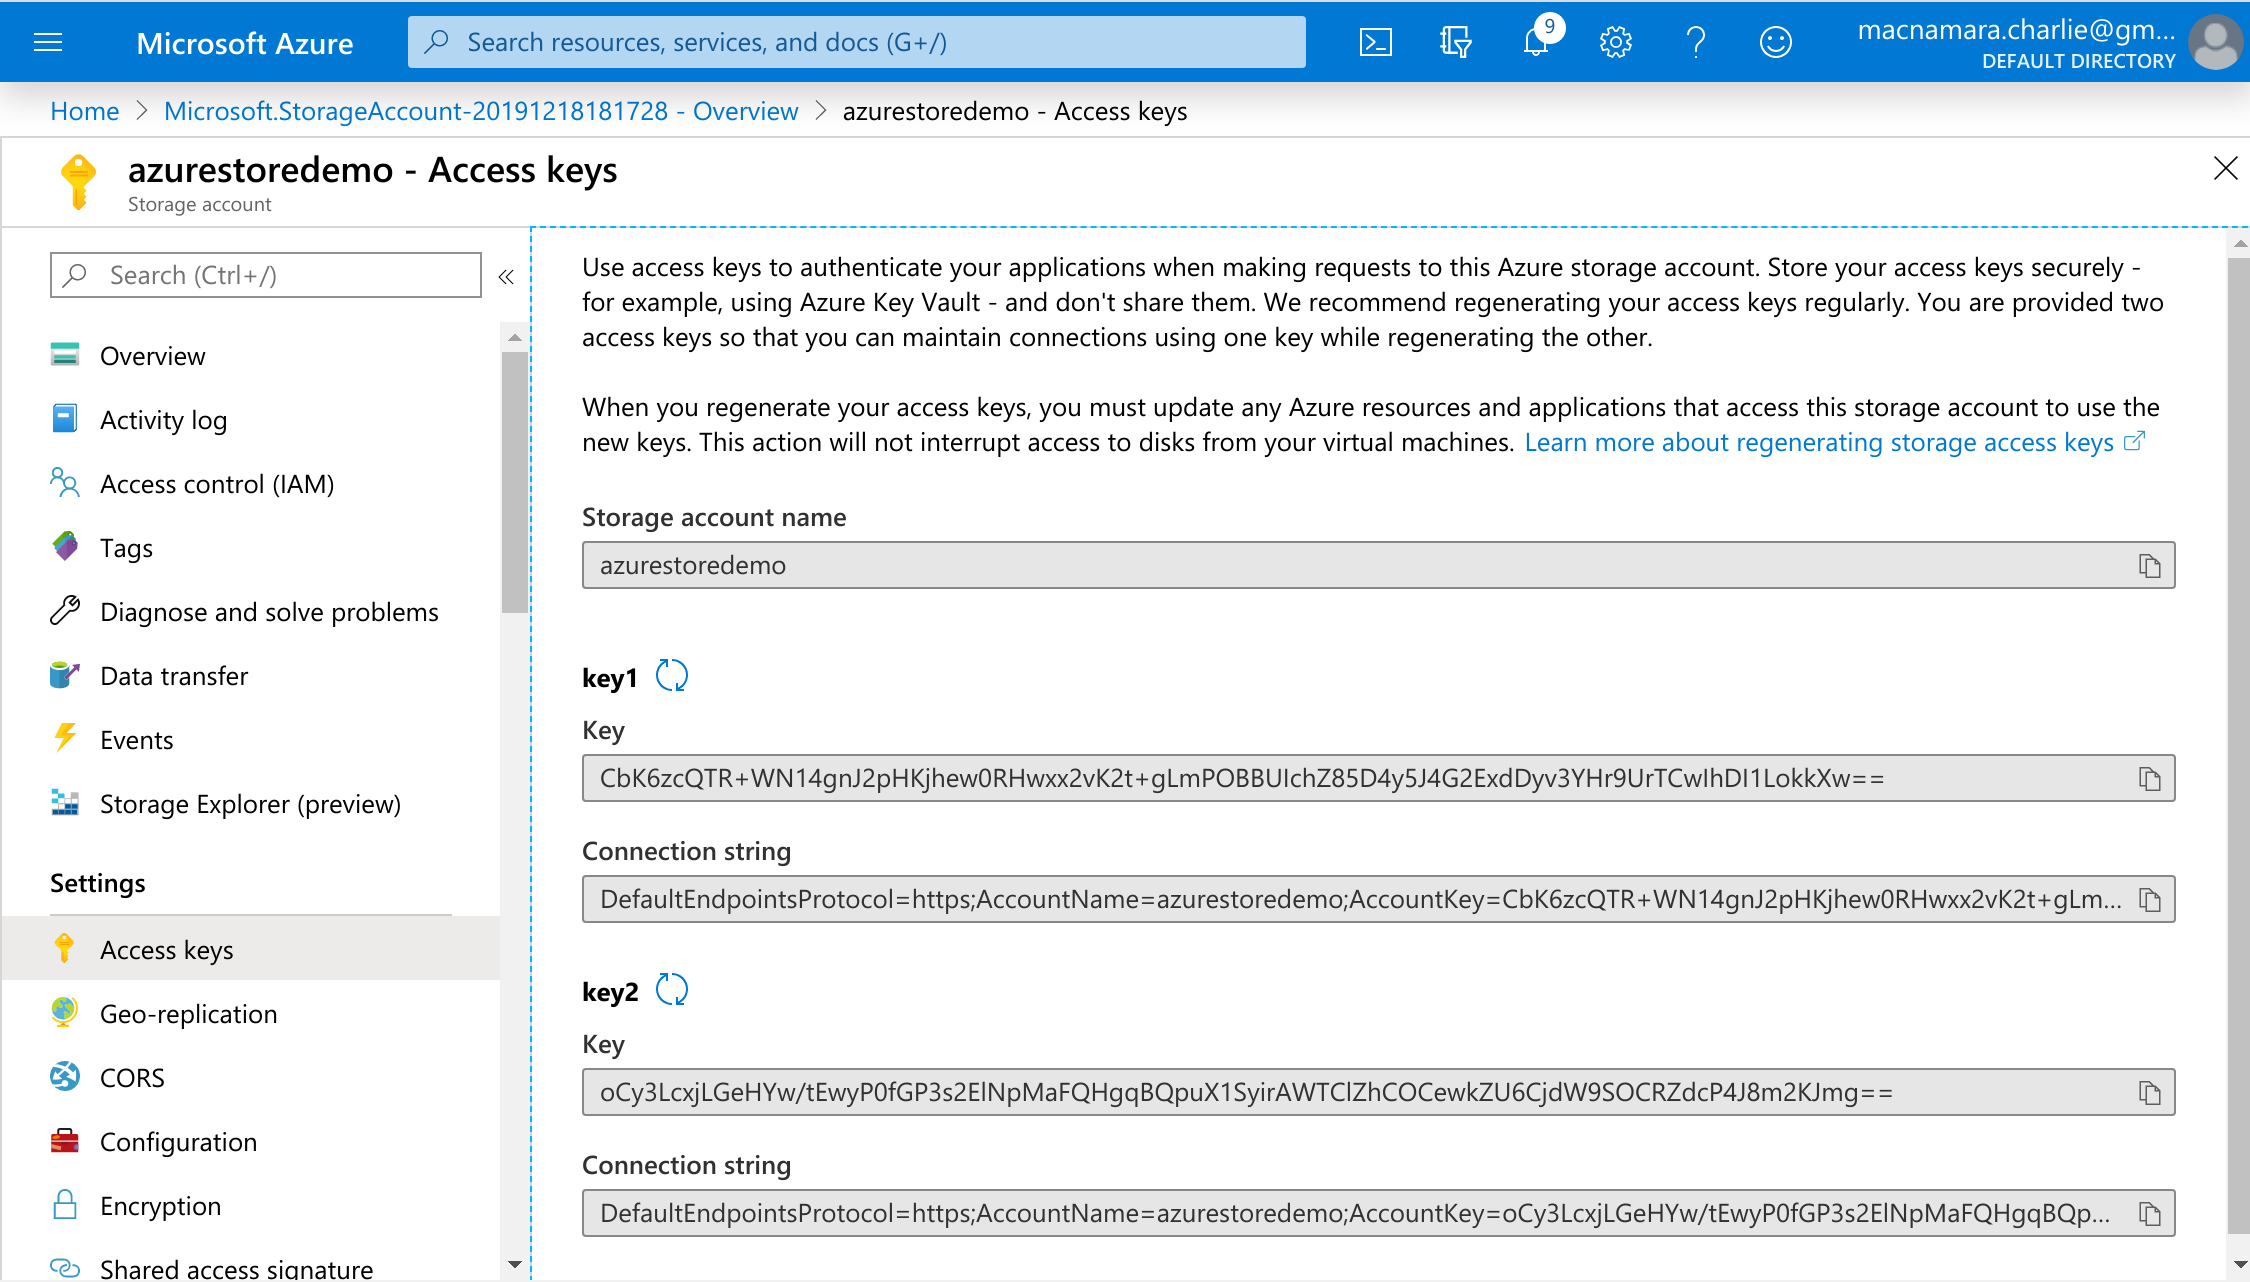 The Microsoft Azure 'Access keys' page, with two keys visible